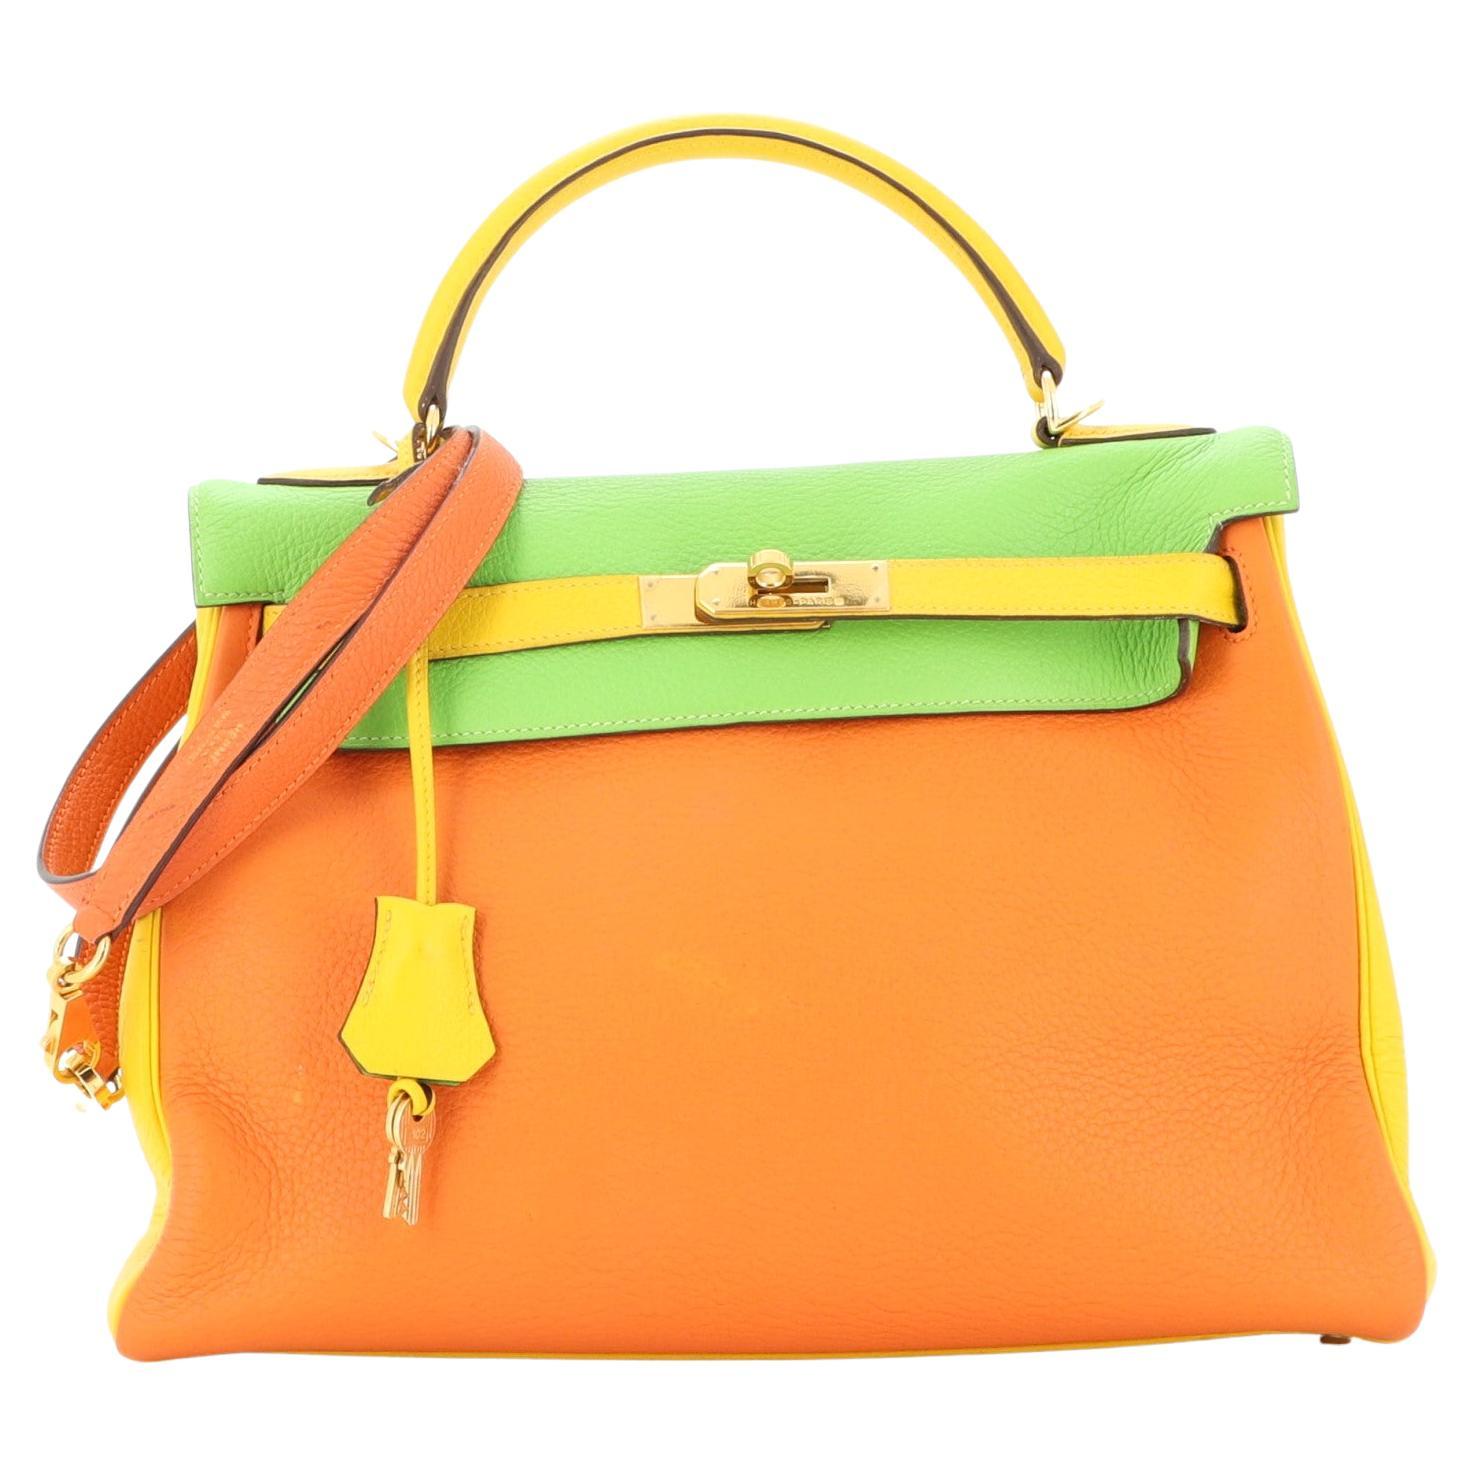 Hermes Kelly Handbag Tricolor Clemence with Gold Hardware 32